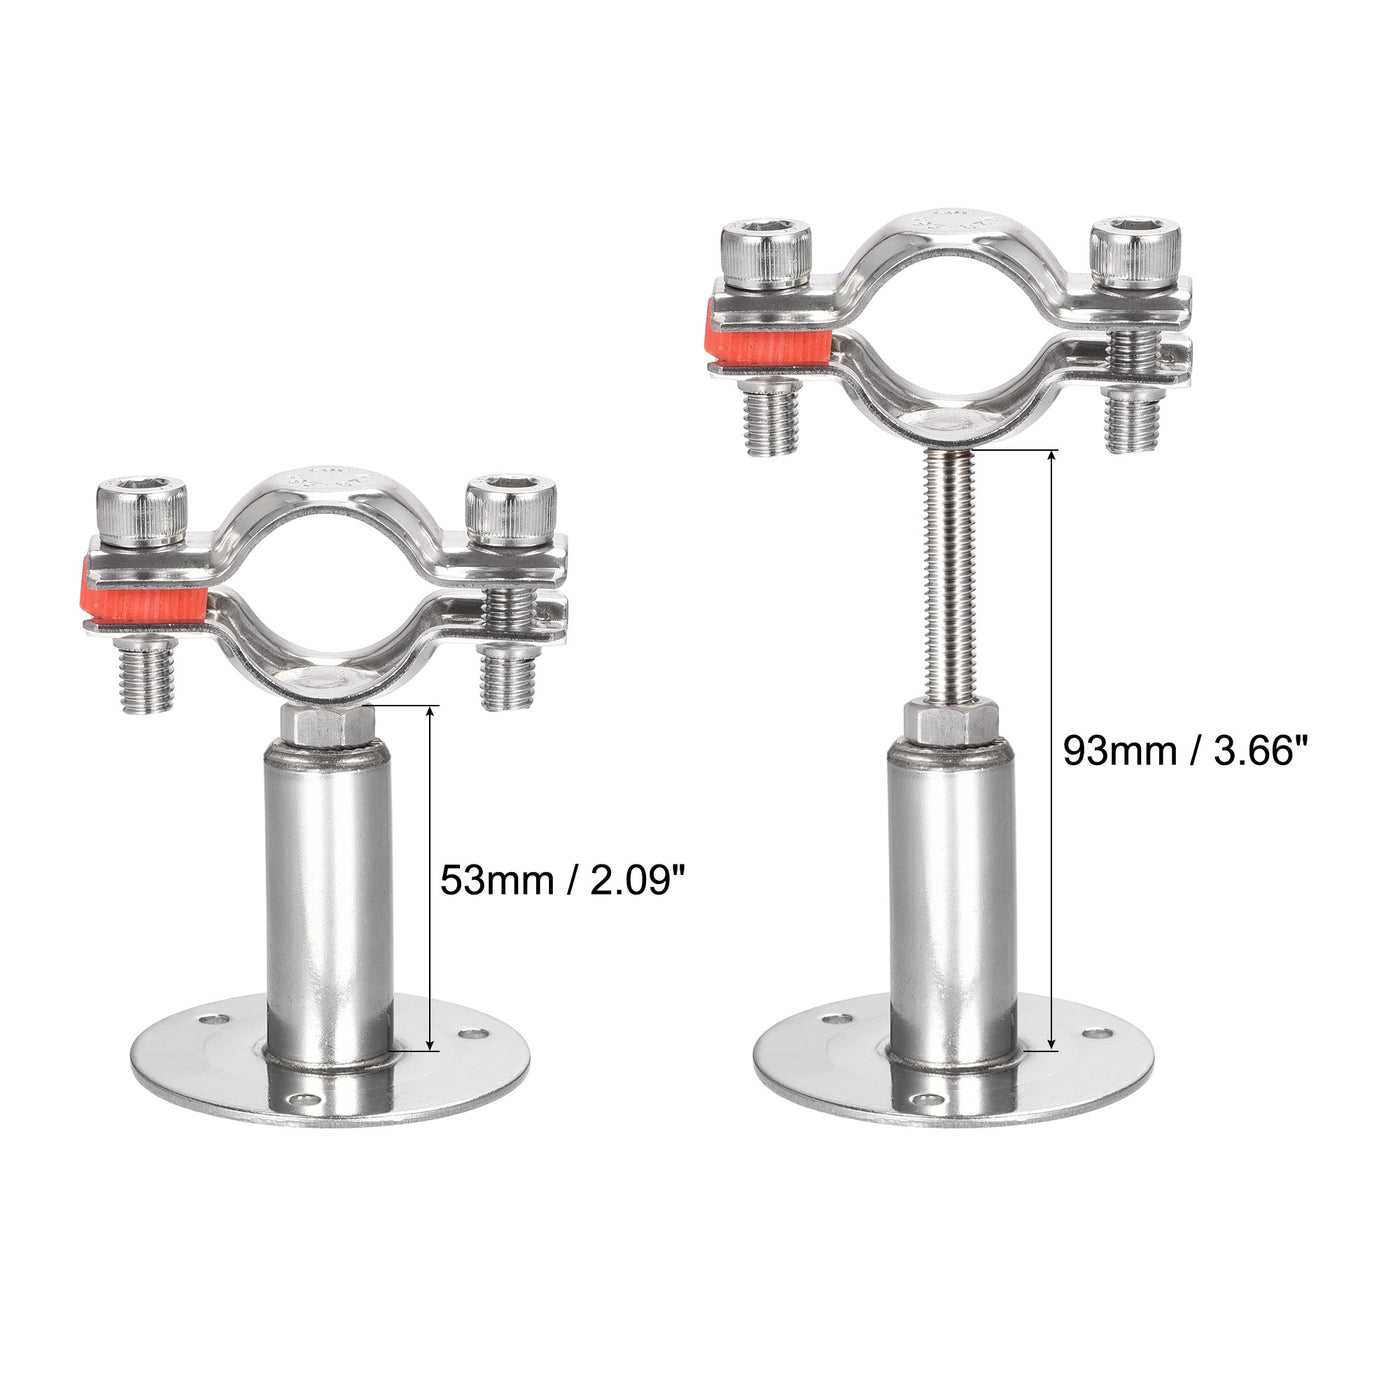 Uxcell Uxcell Wall Mount Ceiling Mount Pipe Support, 304 Stainless Steel Adjustable Pipe Bracket Clamp for 25-28mm Pipe 2pcs